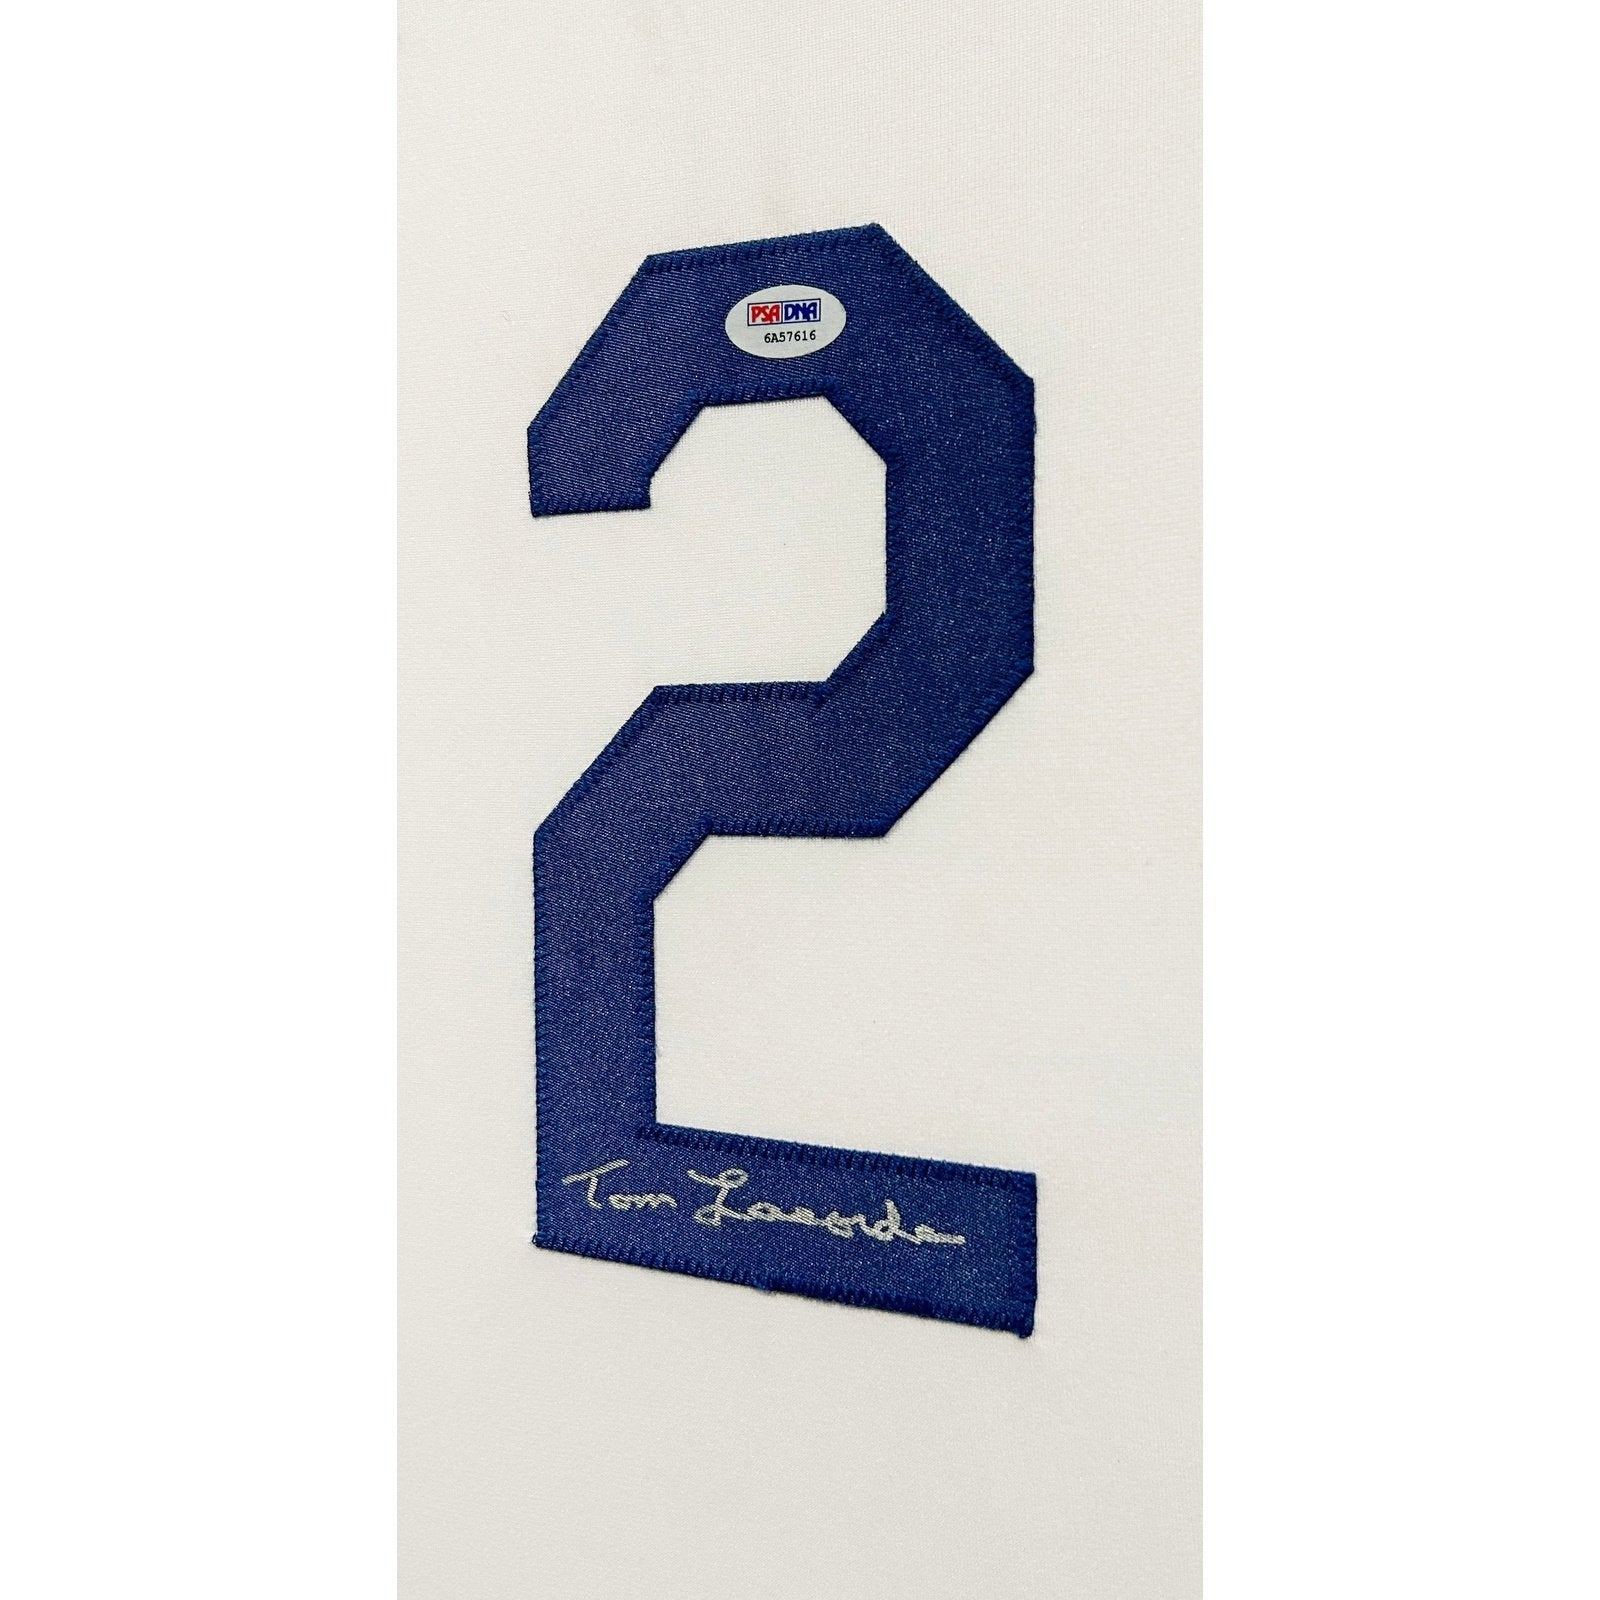 Tommy Lasorda Autographed and Framed Los Angeles Dodgers Jersey